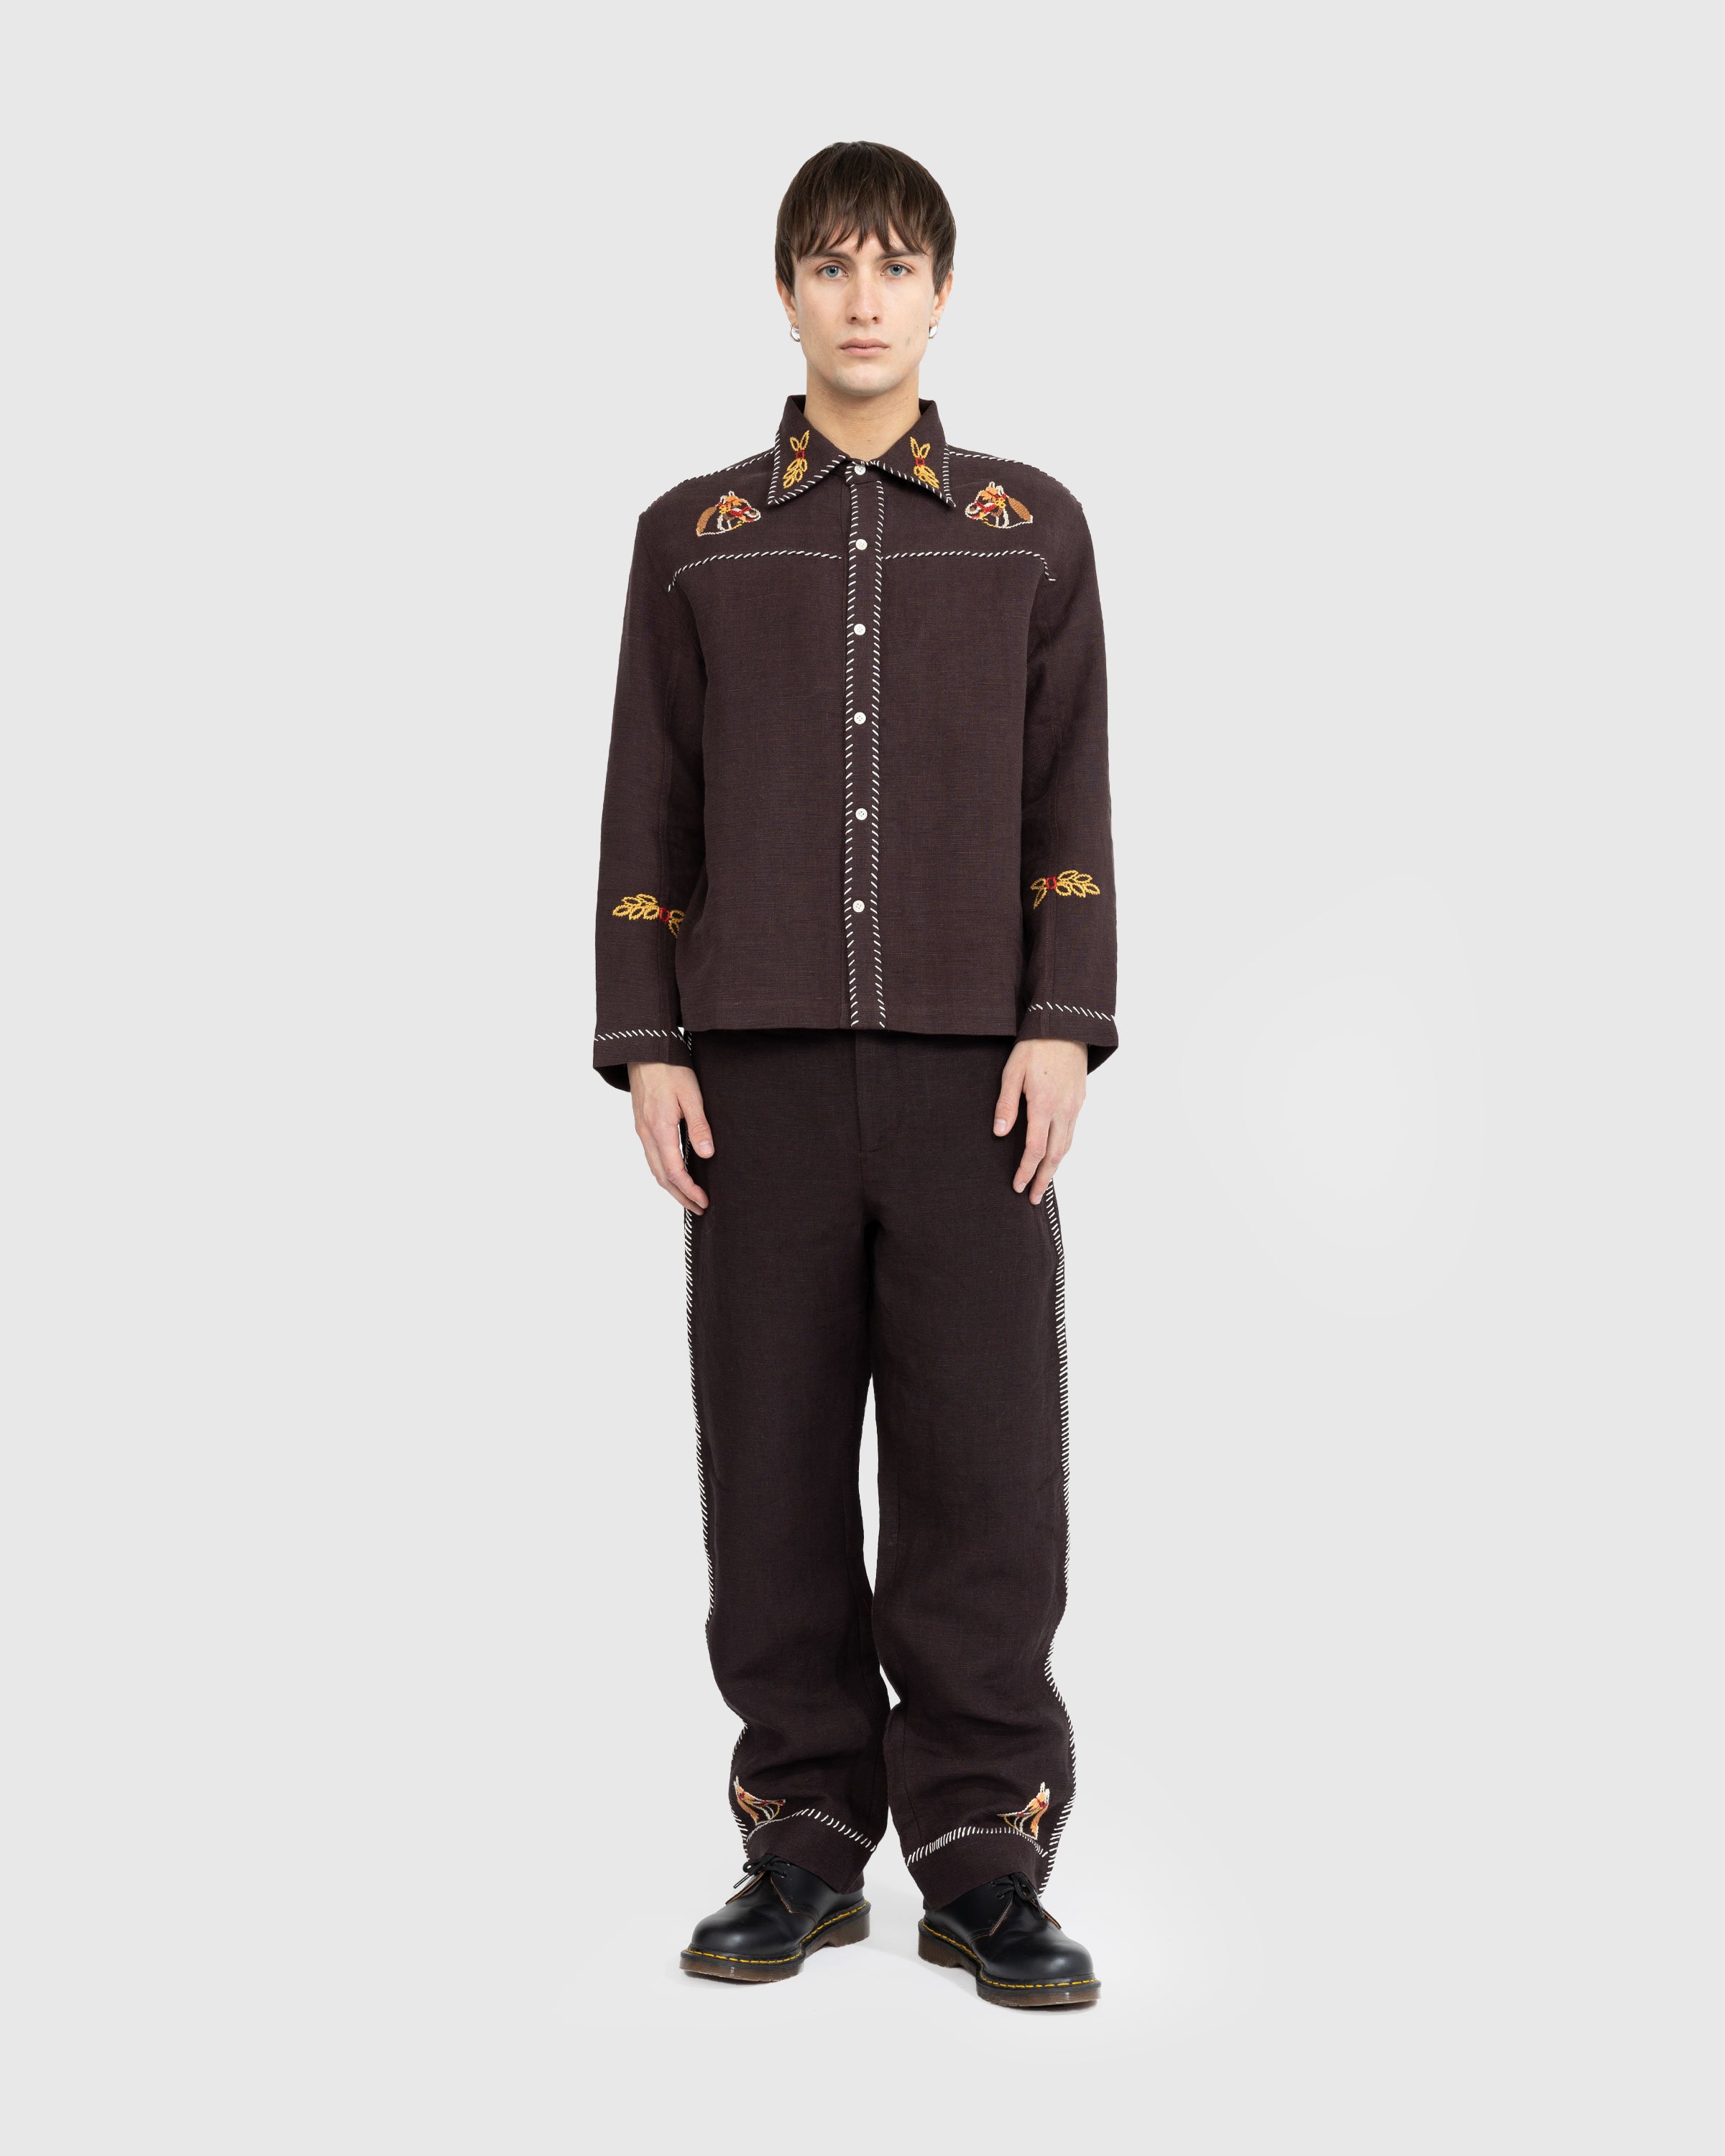 Bode - Show Pony Overshirt Brown - Clothing - BROWN - Image 3